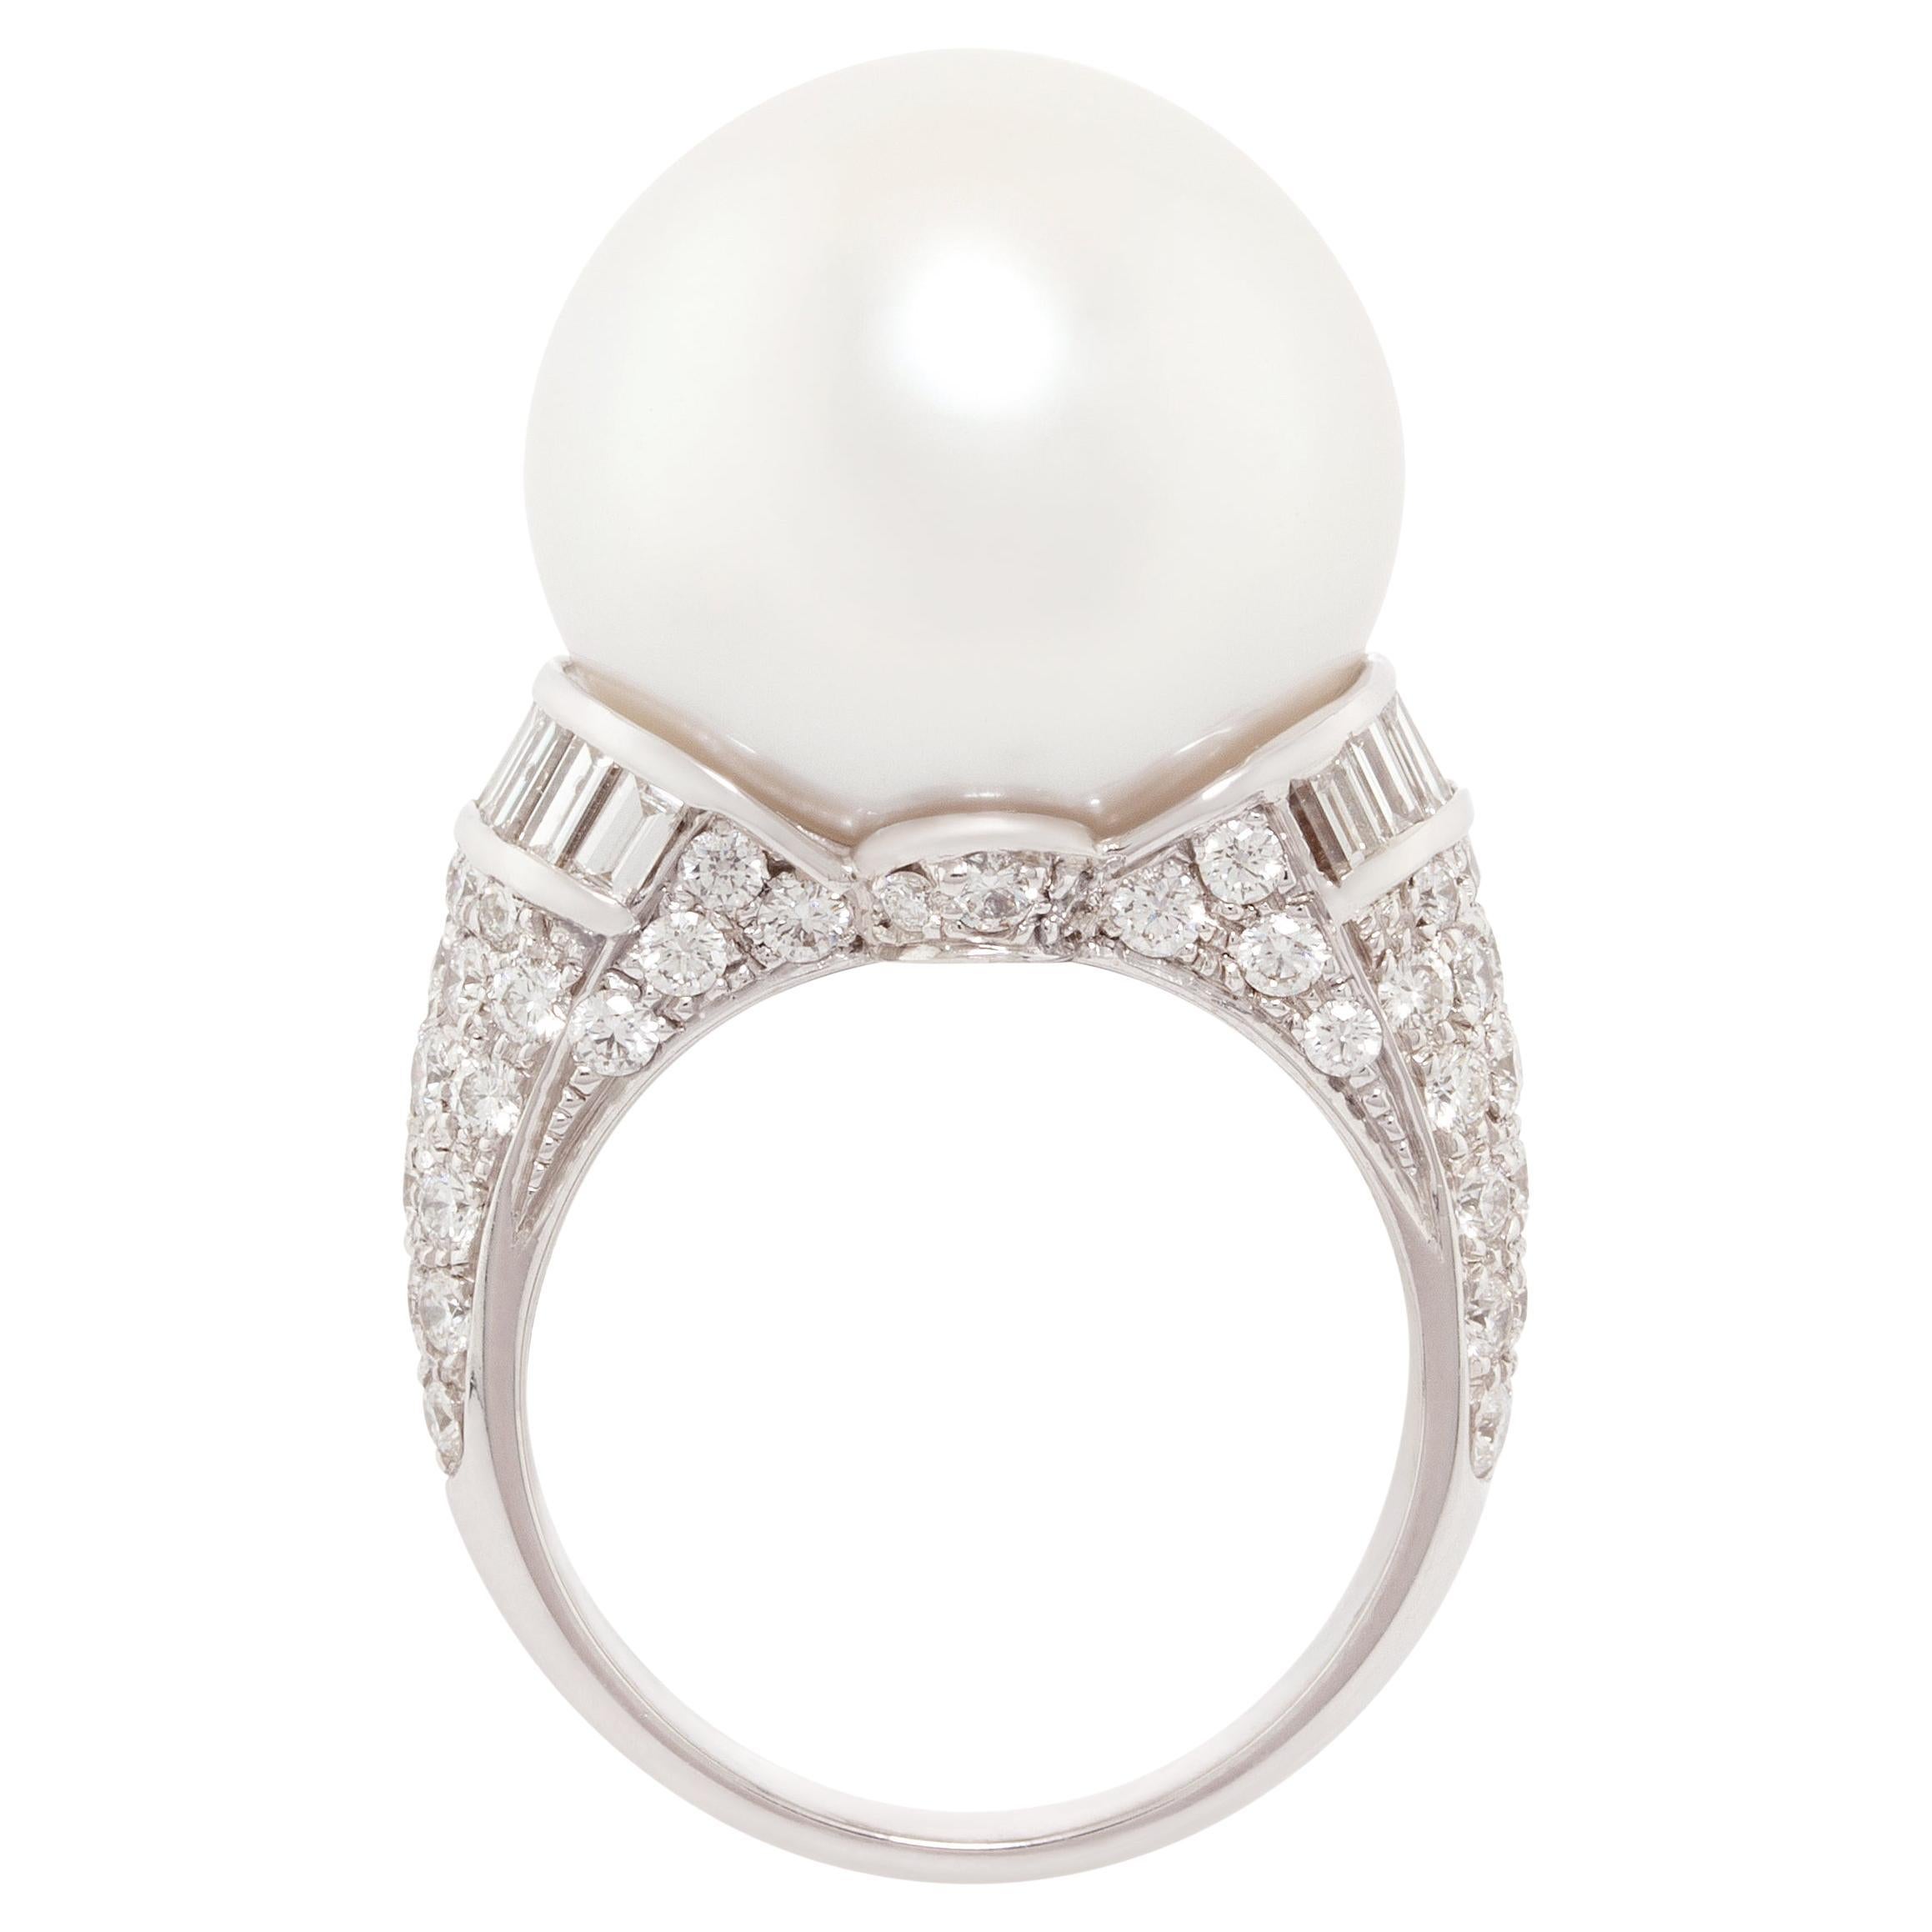 Ella Gafter 18mm Pearl Diamond Cocktail Ring For Sale